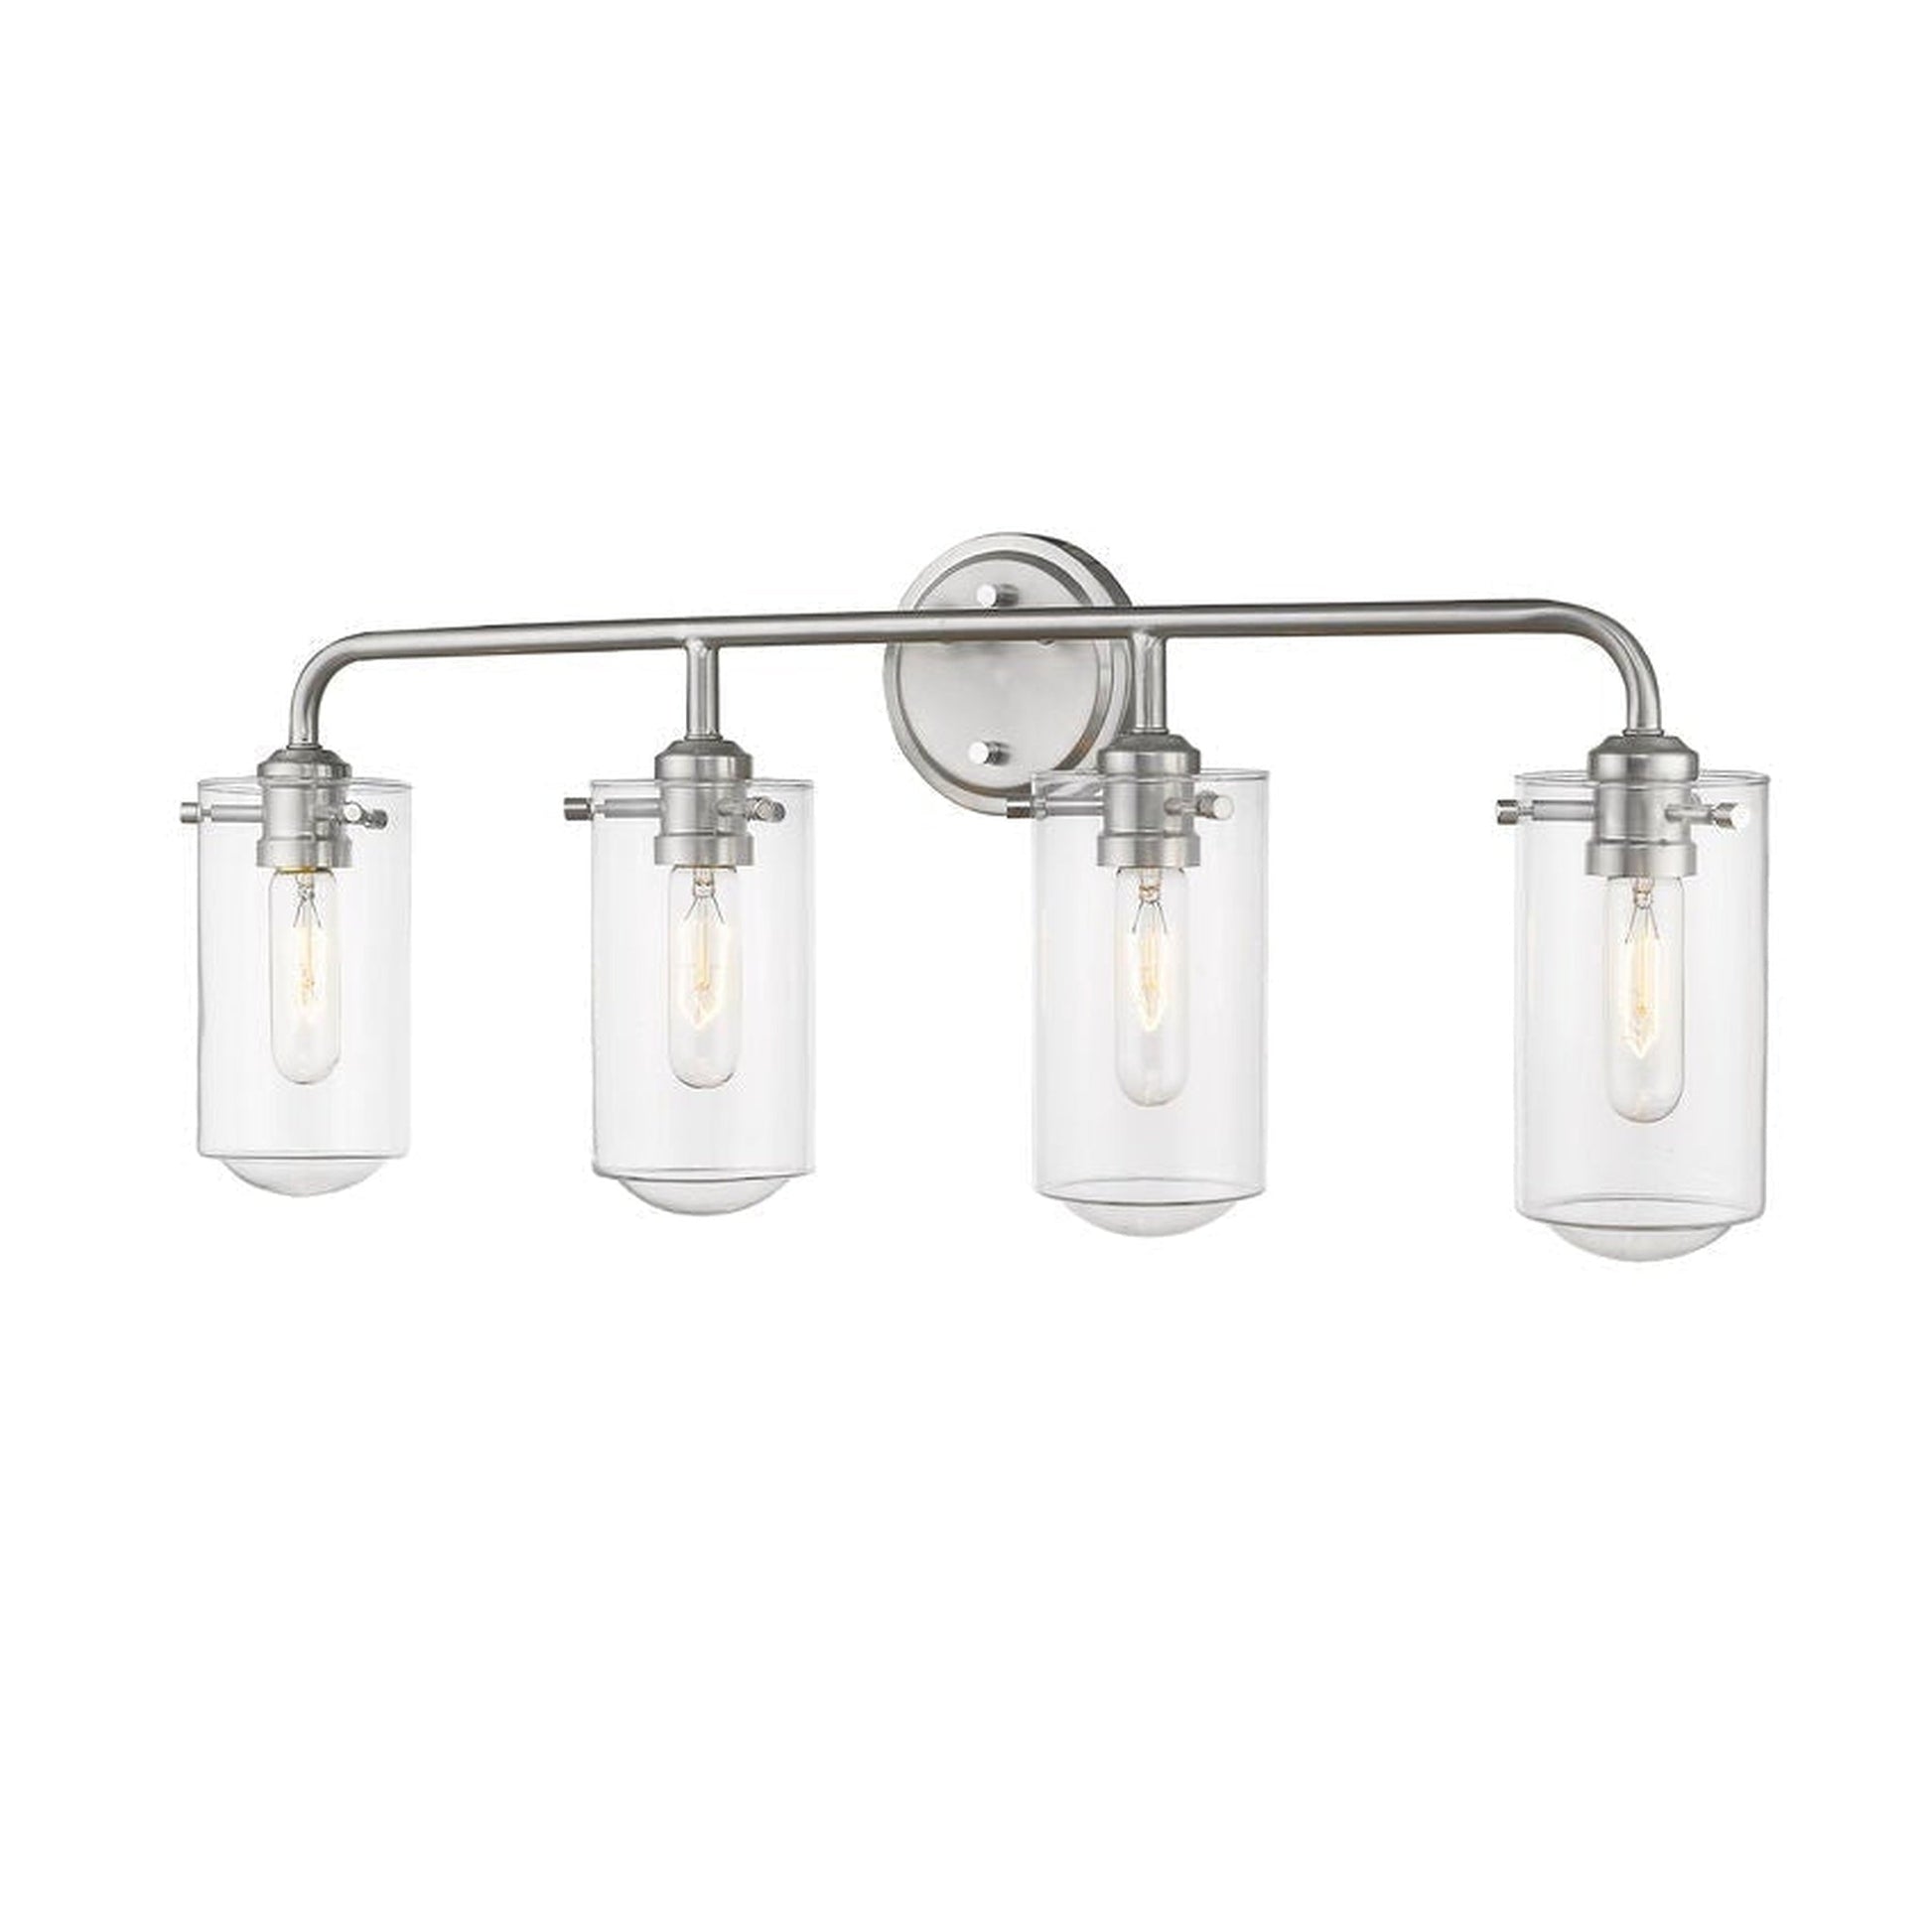 Z-Lite Delaney 30" 4-Light Brushed Nickel Vanity Light With Clear Glass Shade